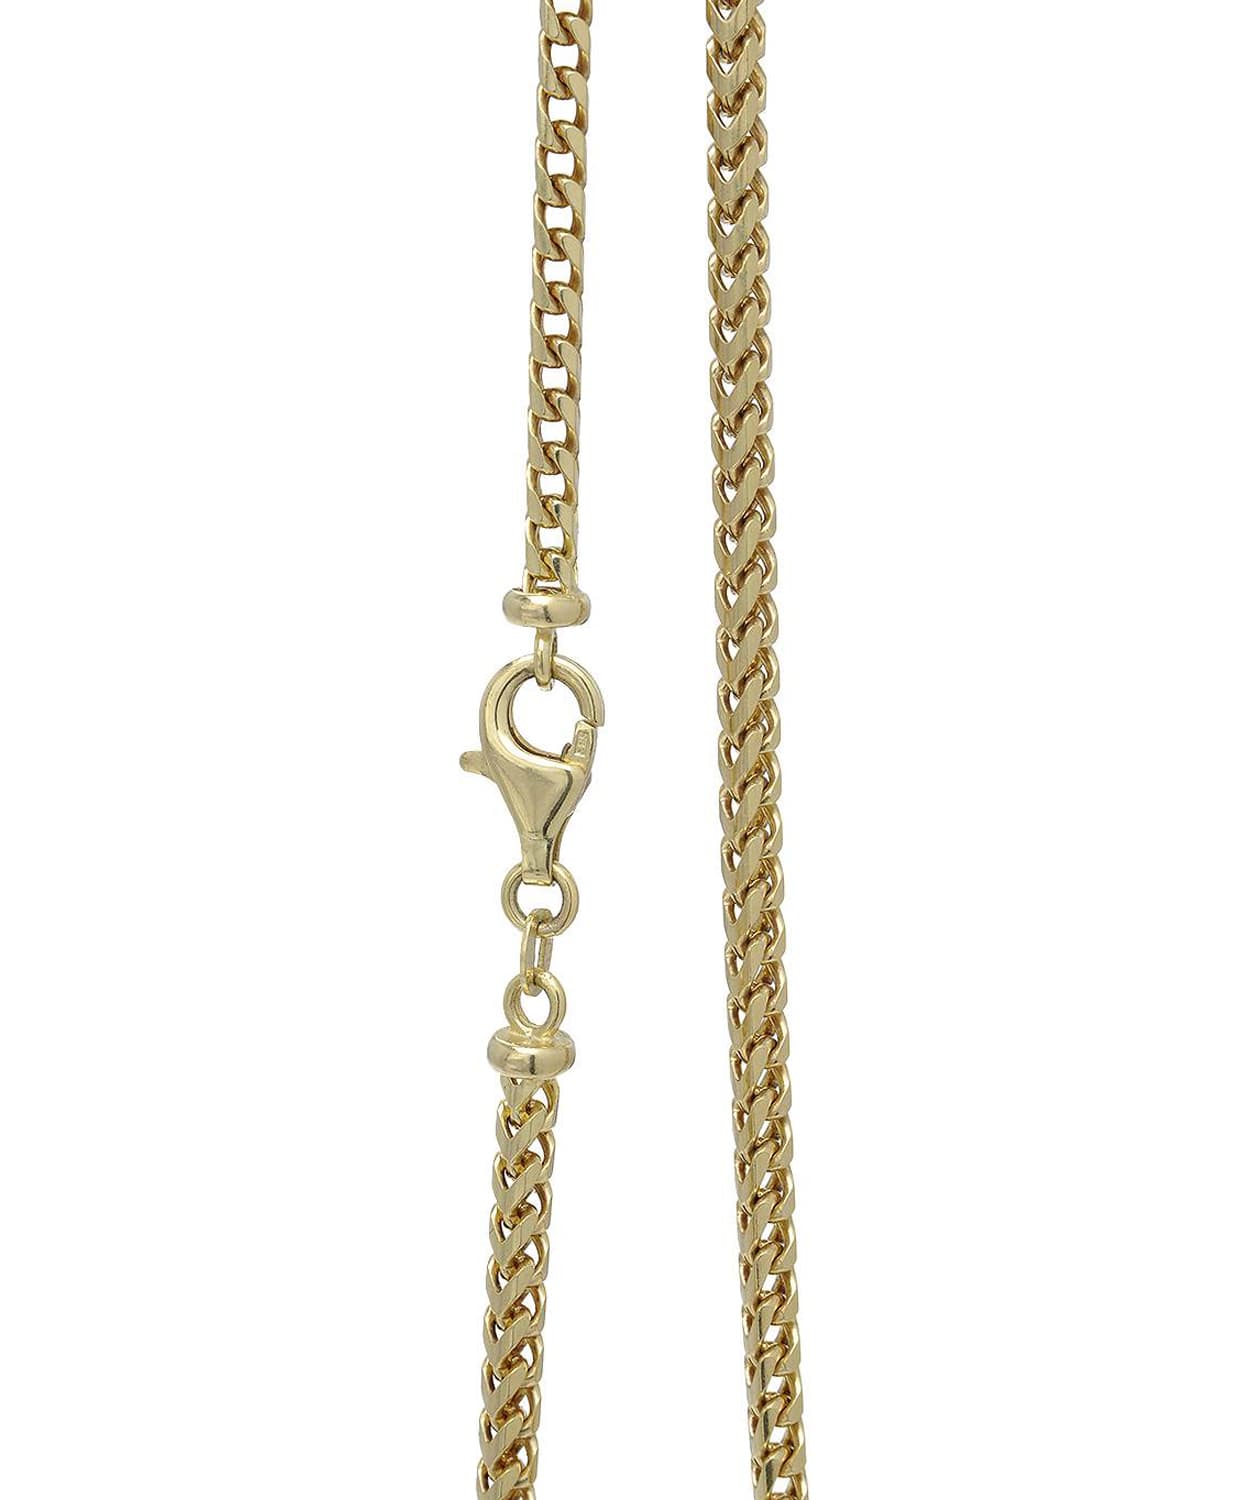 Dapper Man Collection 3.0mm 14k Solid Yellow Gold Franco Chain View 2